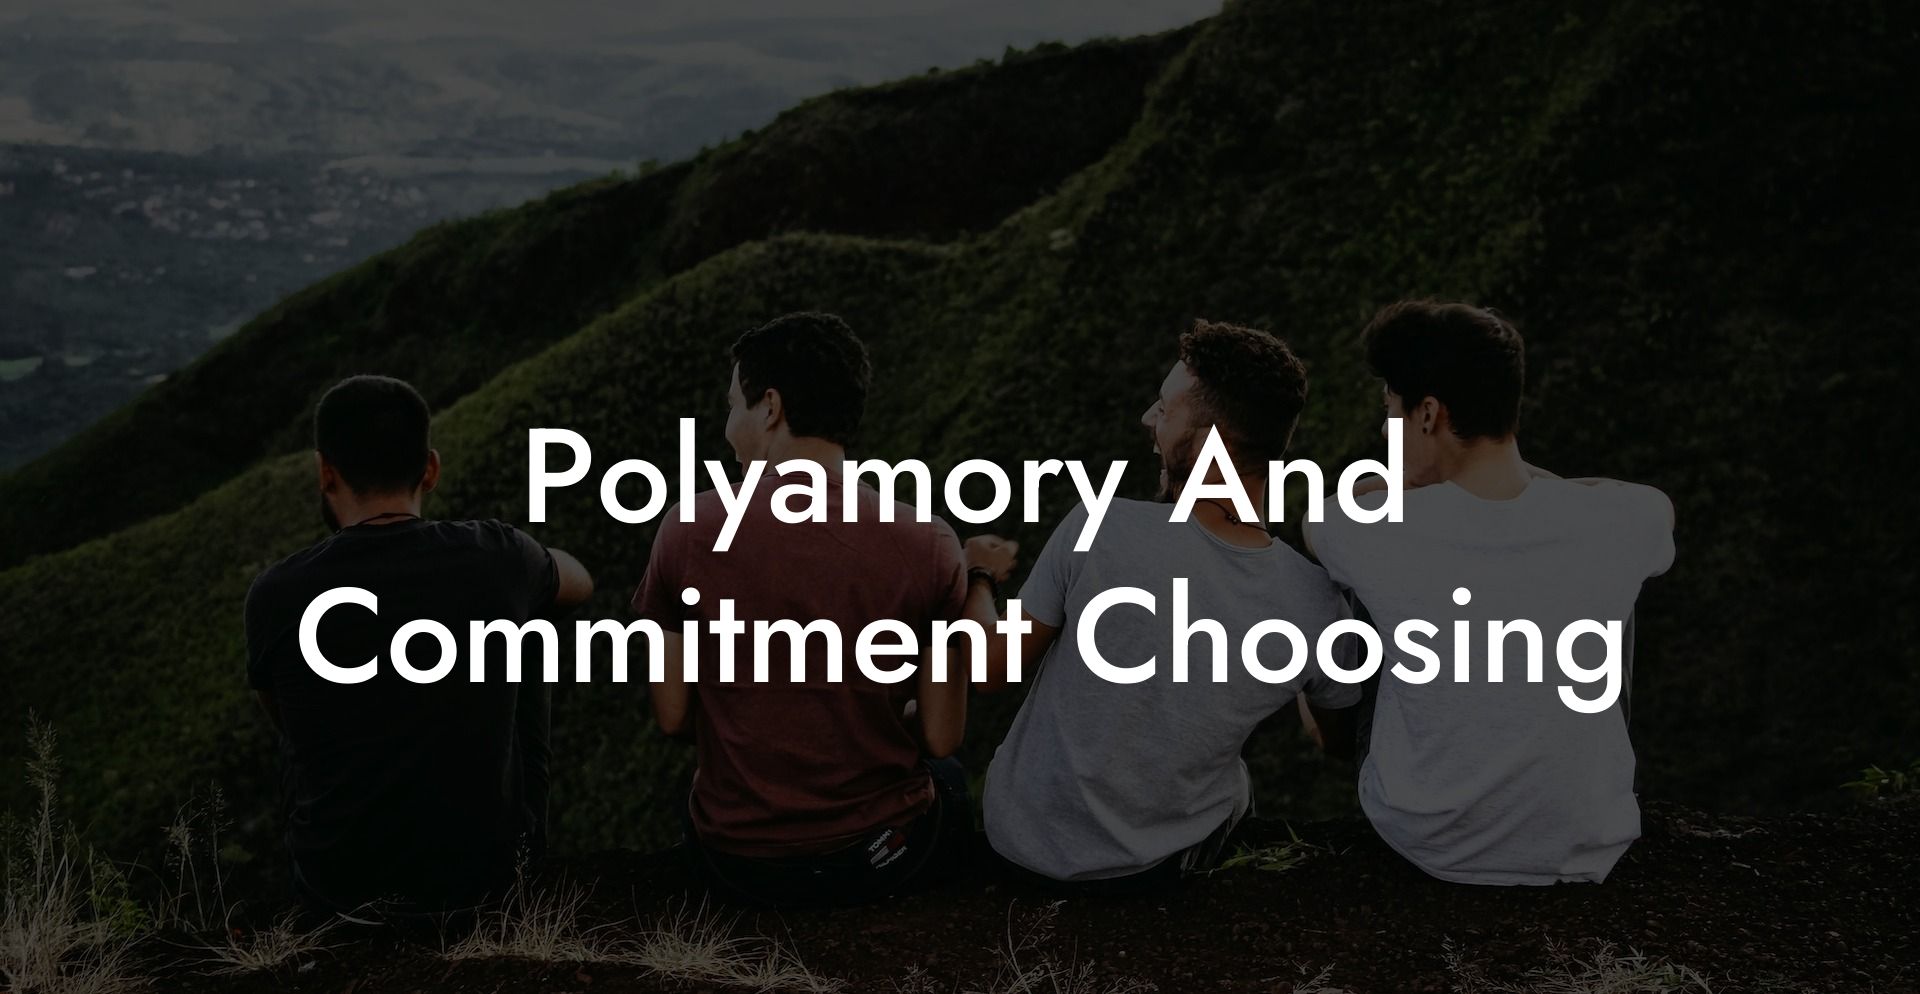 Polyamory And Commitment Choosing